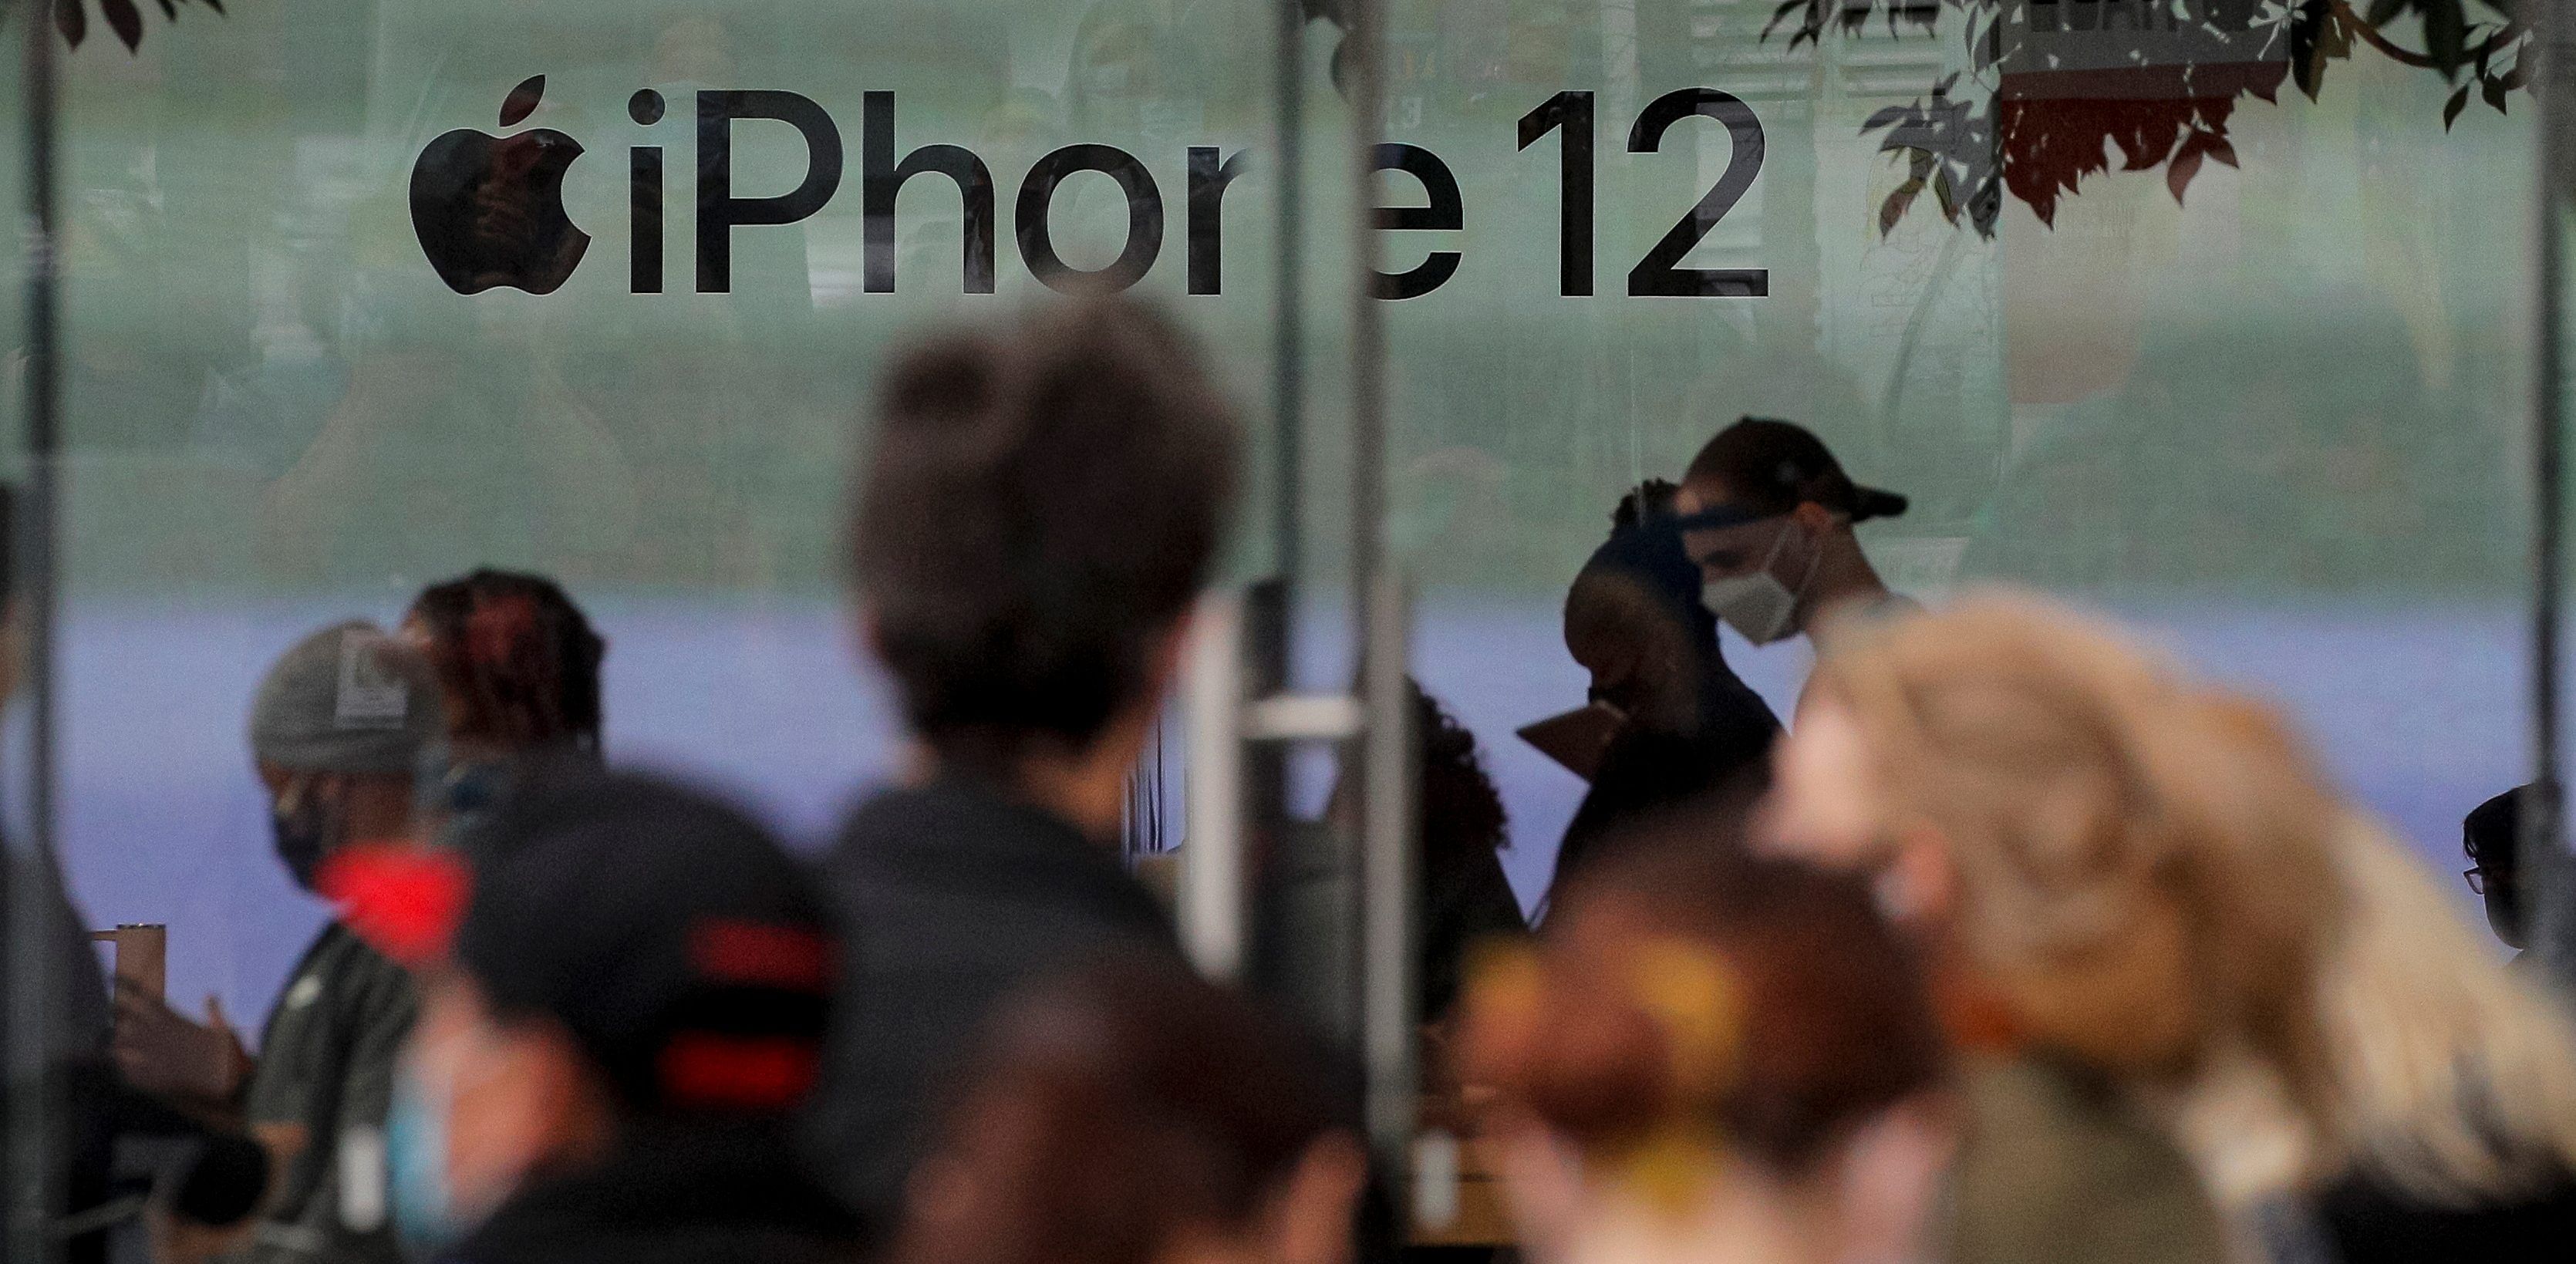 Apple typically puts new iPhone models on sale in the third quarter, but this year the devices were not available until late October. Two of the handsets, the iPhone 12 mini and iPhone 12 Pro Max, won’t arrive in stores until the middle of November. Credit: Reuters